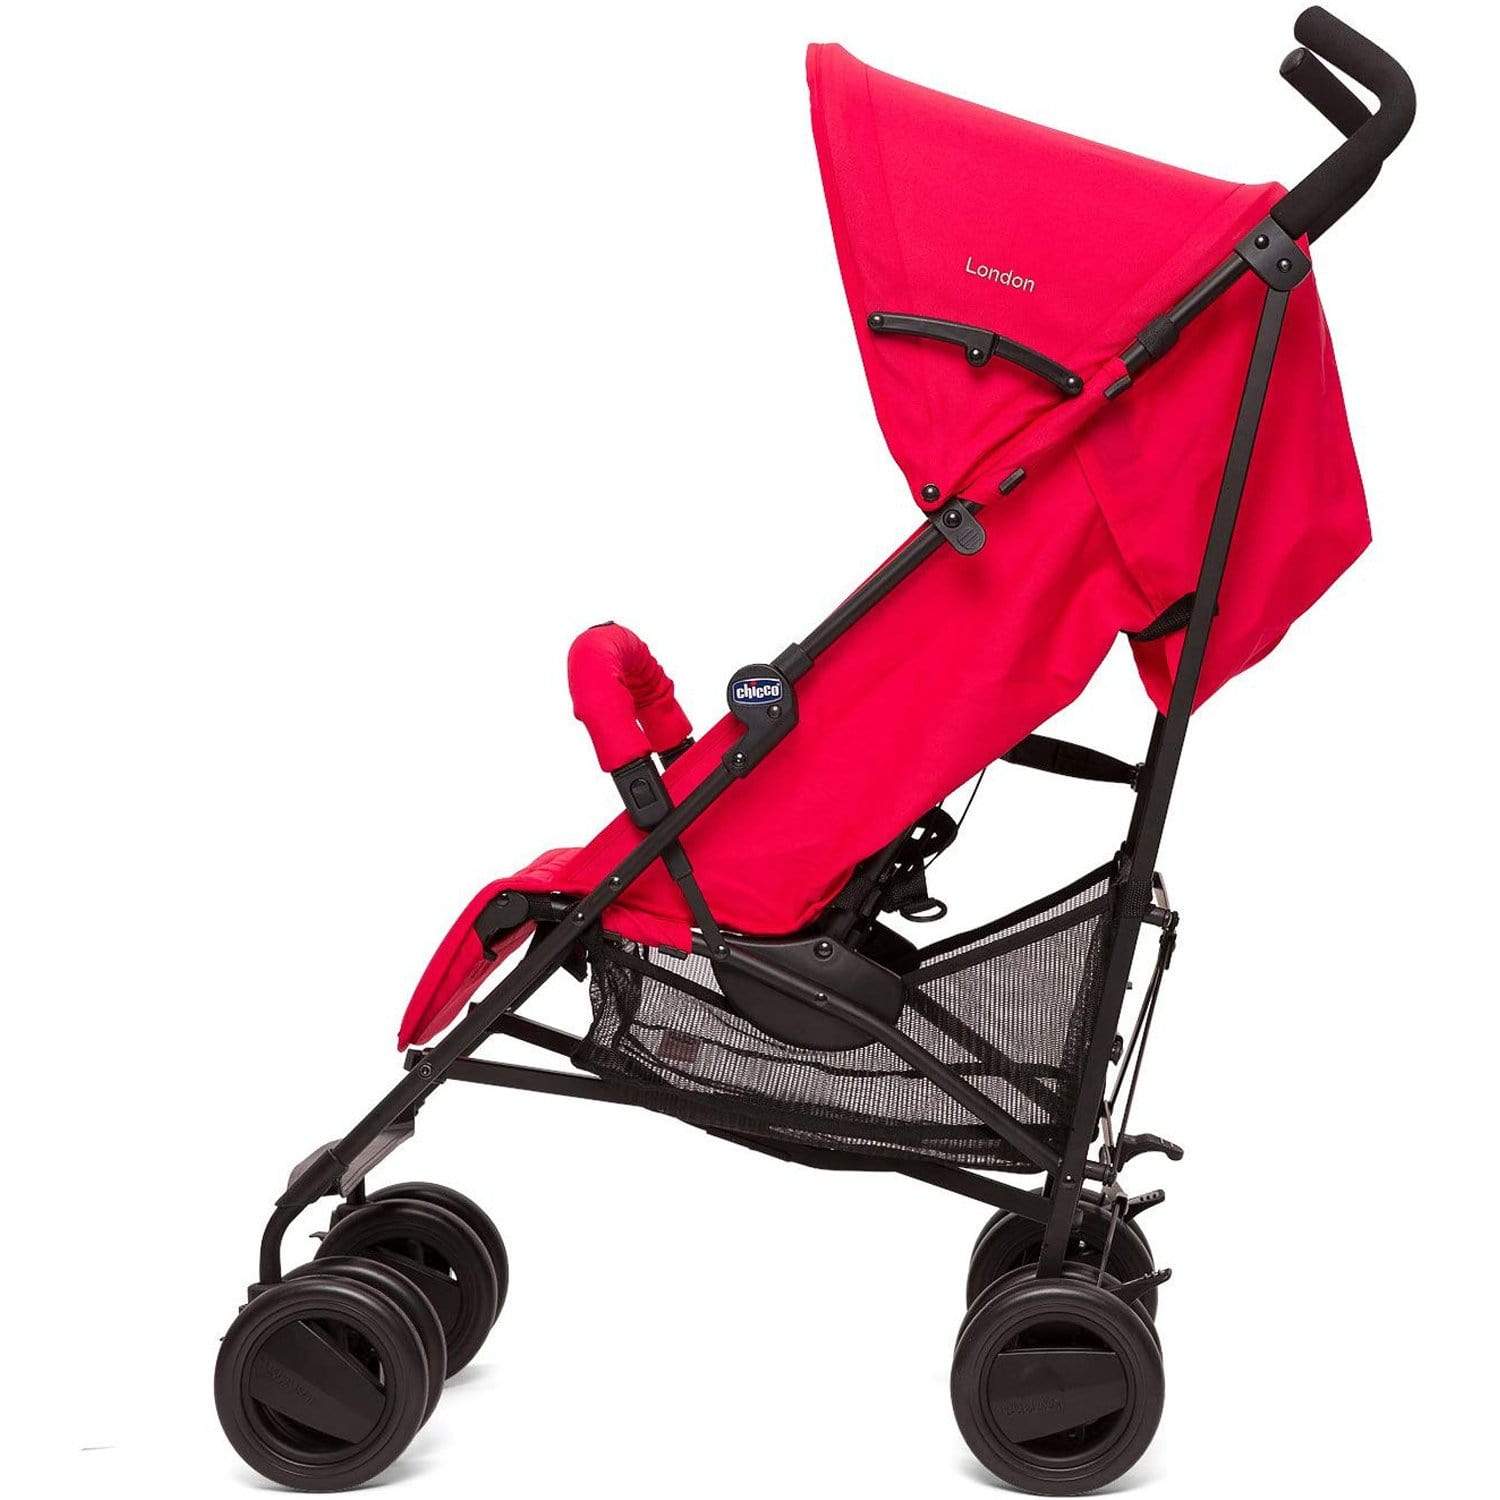 Chicco-London-Up-Stroller-with-Bumper-Bar-Red-Passion-CH79258-64R